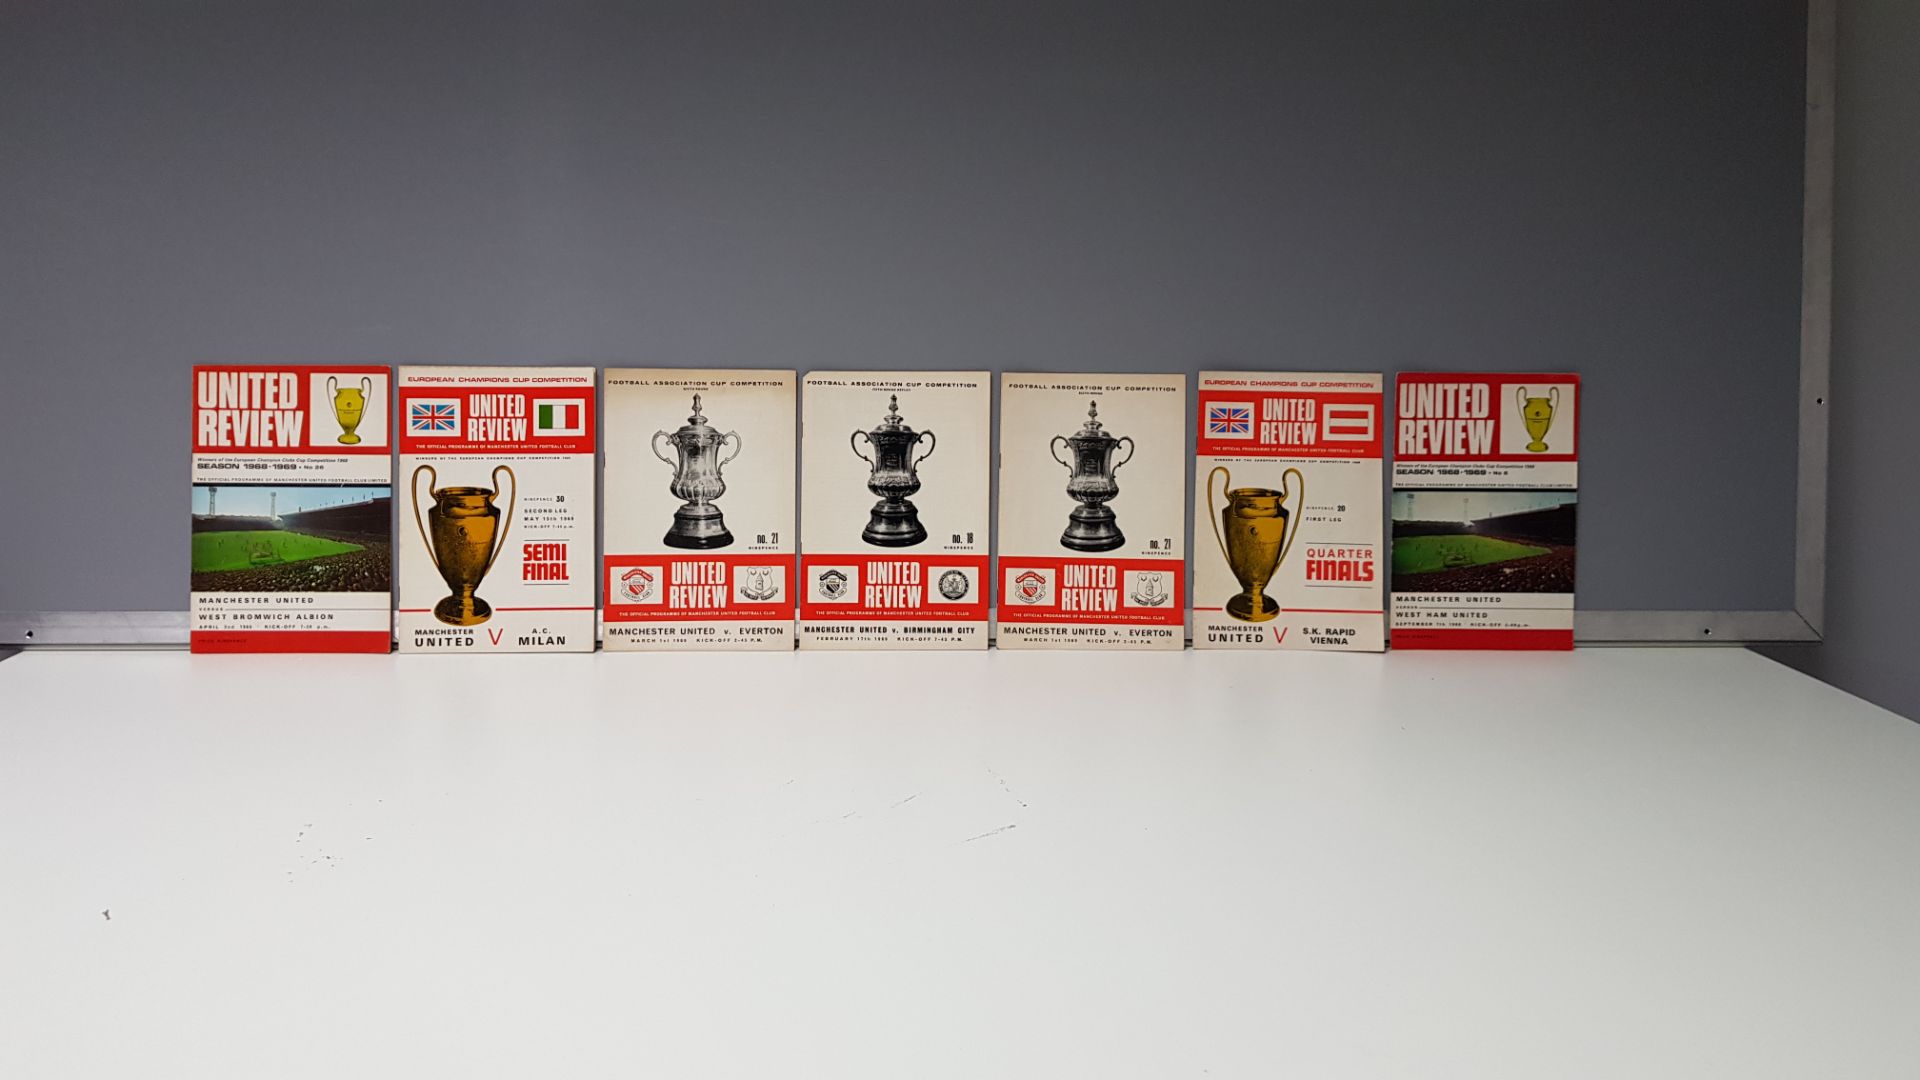 7 X OFFICIAL MANCHESTER UNITED PROGRAMMES WITH CARTOON TOKENS IN NEAR MINT CONDITION TO INCLUDE -